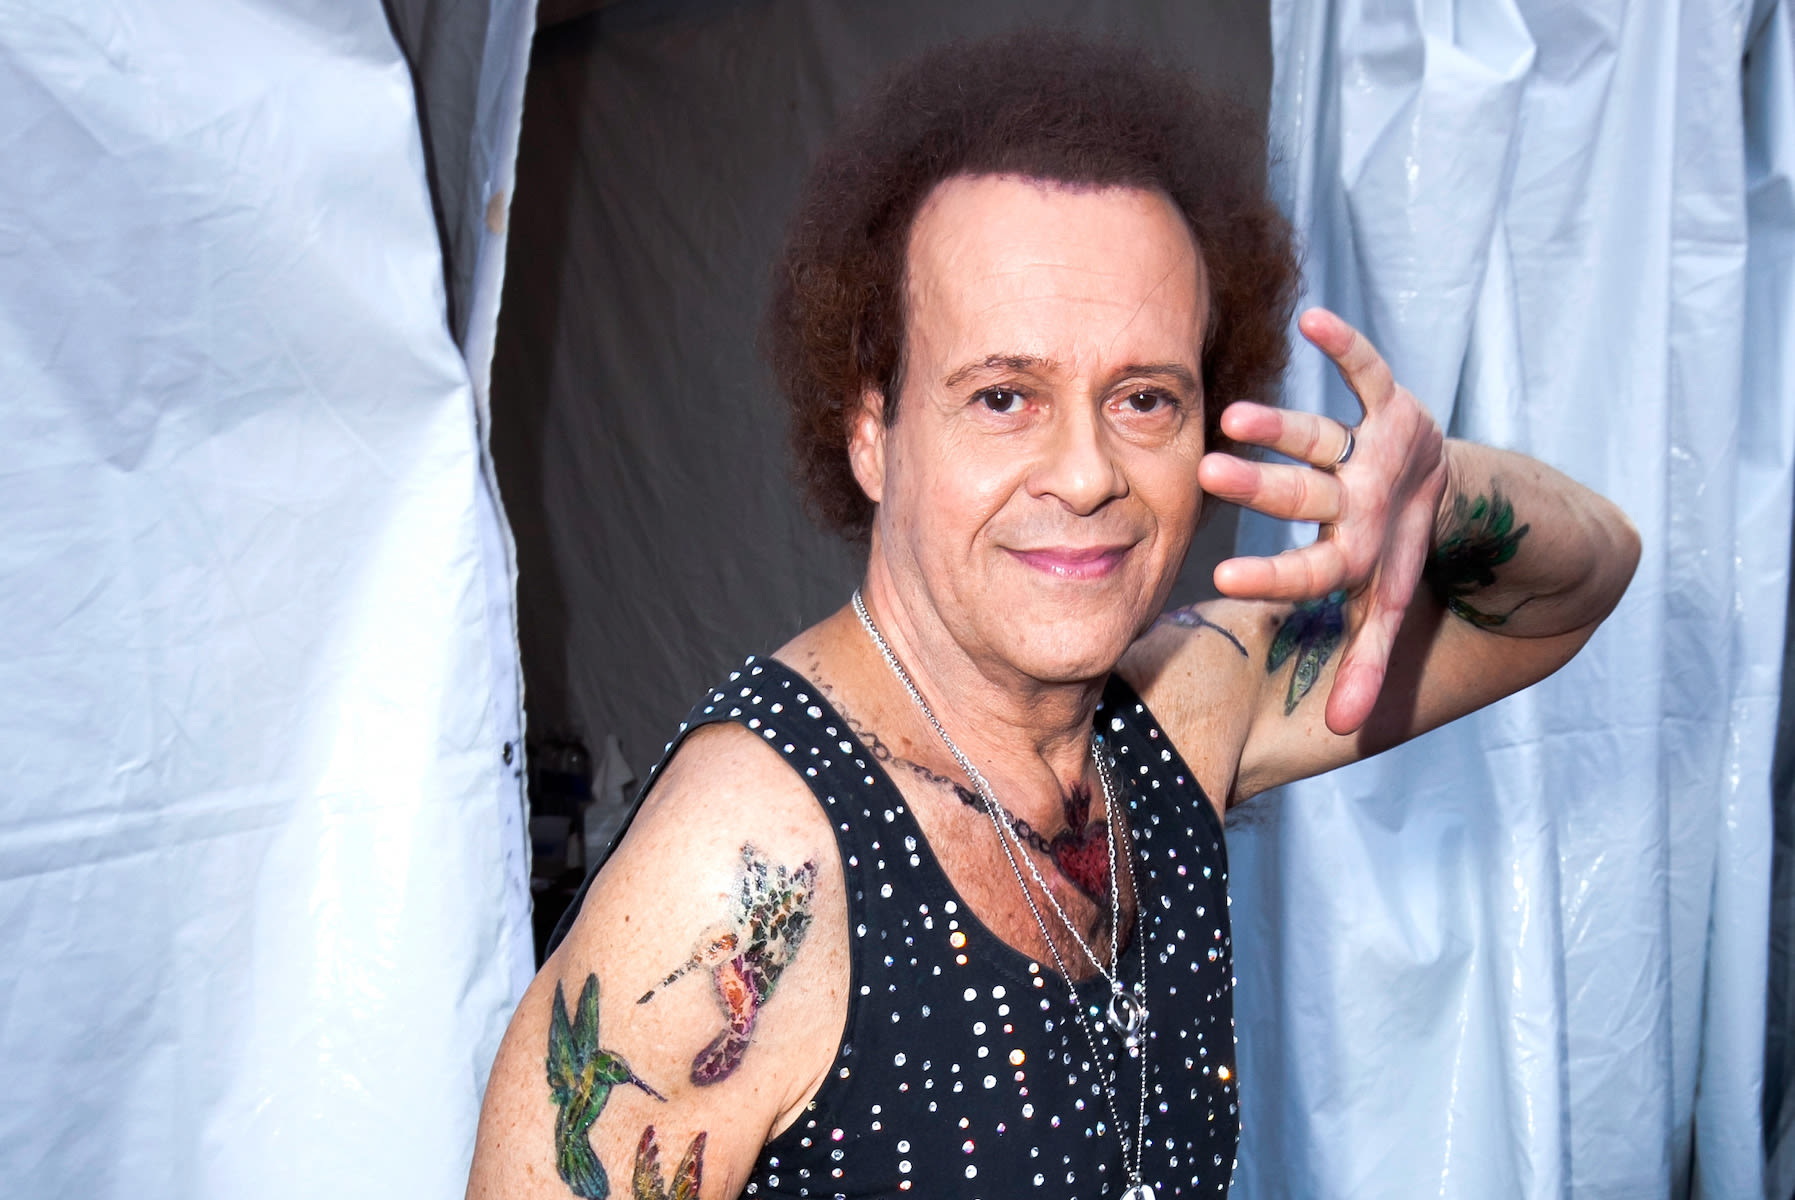 Richard Simmons’ Staff Shares Fitness Guru’s Final ‘Planned’ Message to Fans